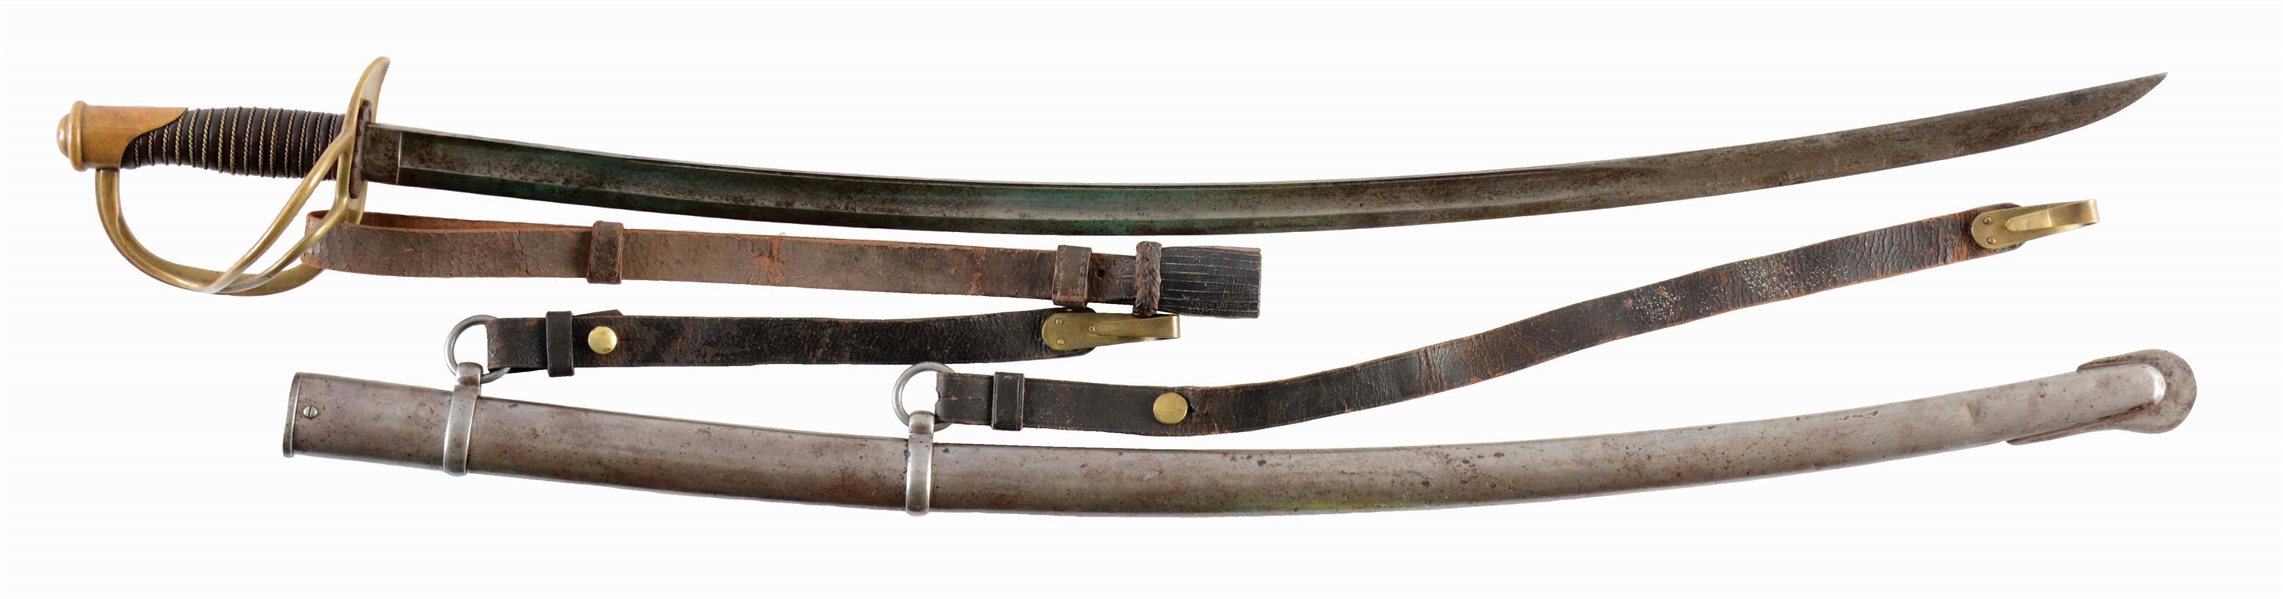 MODEL 1840 "WRISTBREAKER" CIVIL WAR SABER WITH KNOT AND HANGERS.